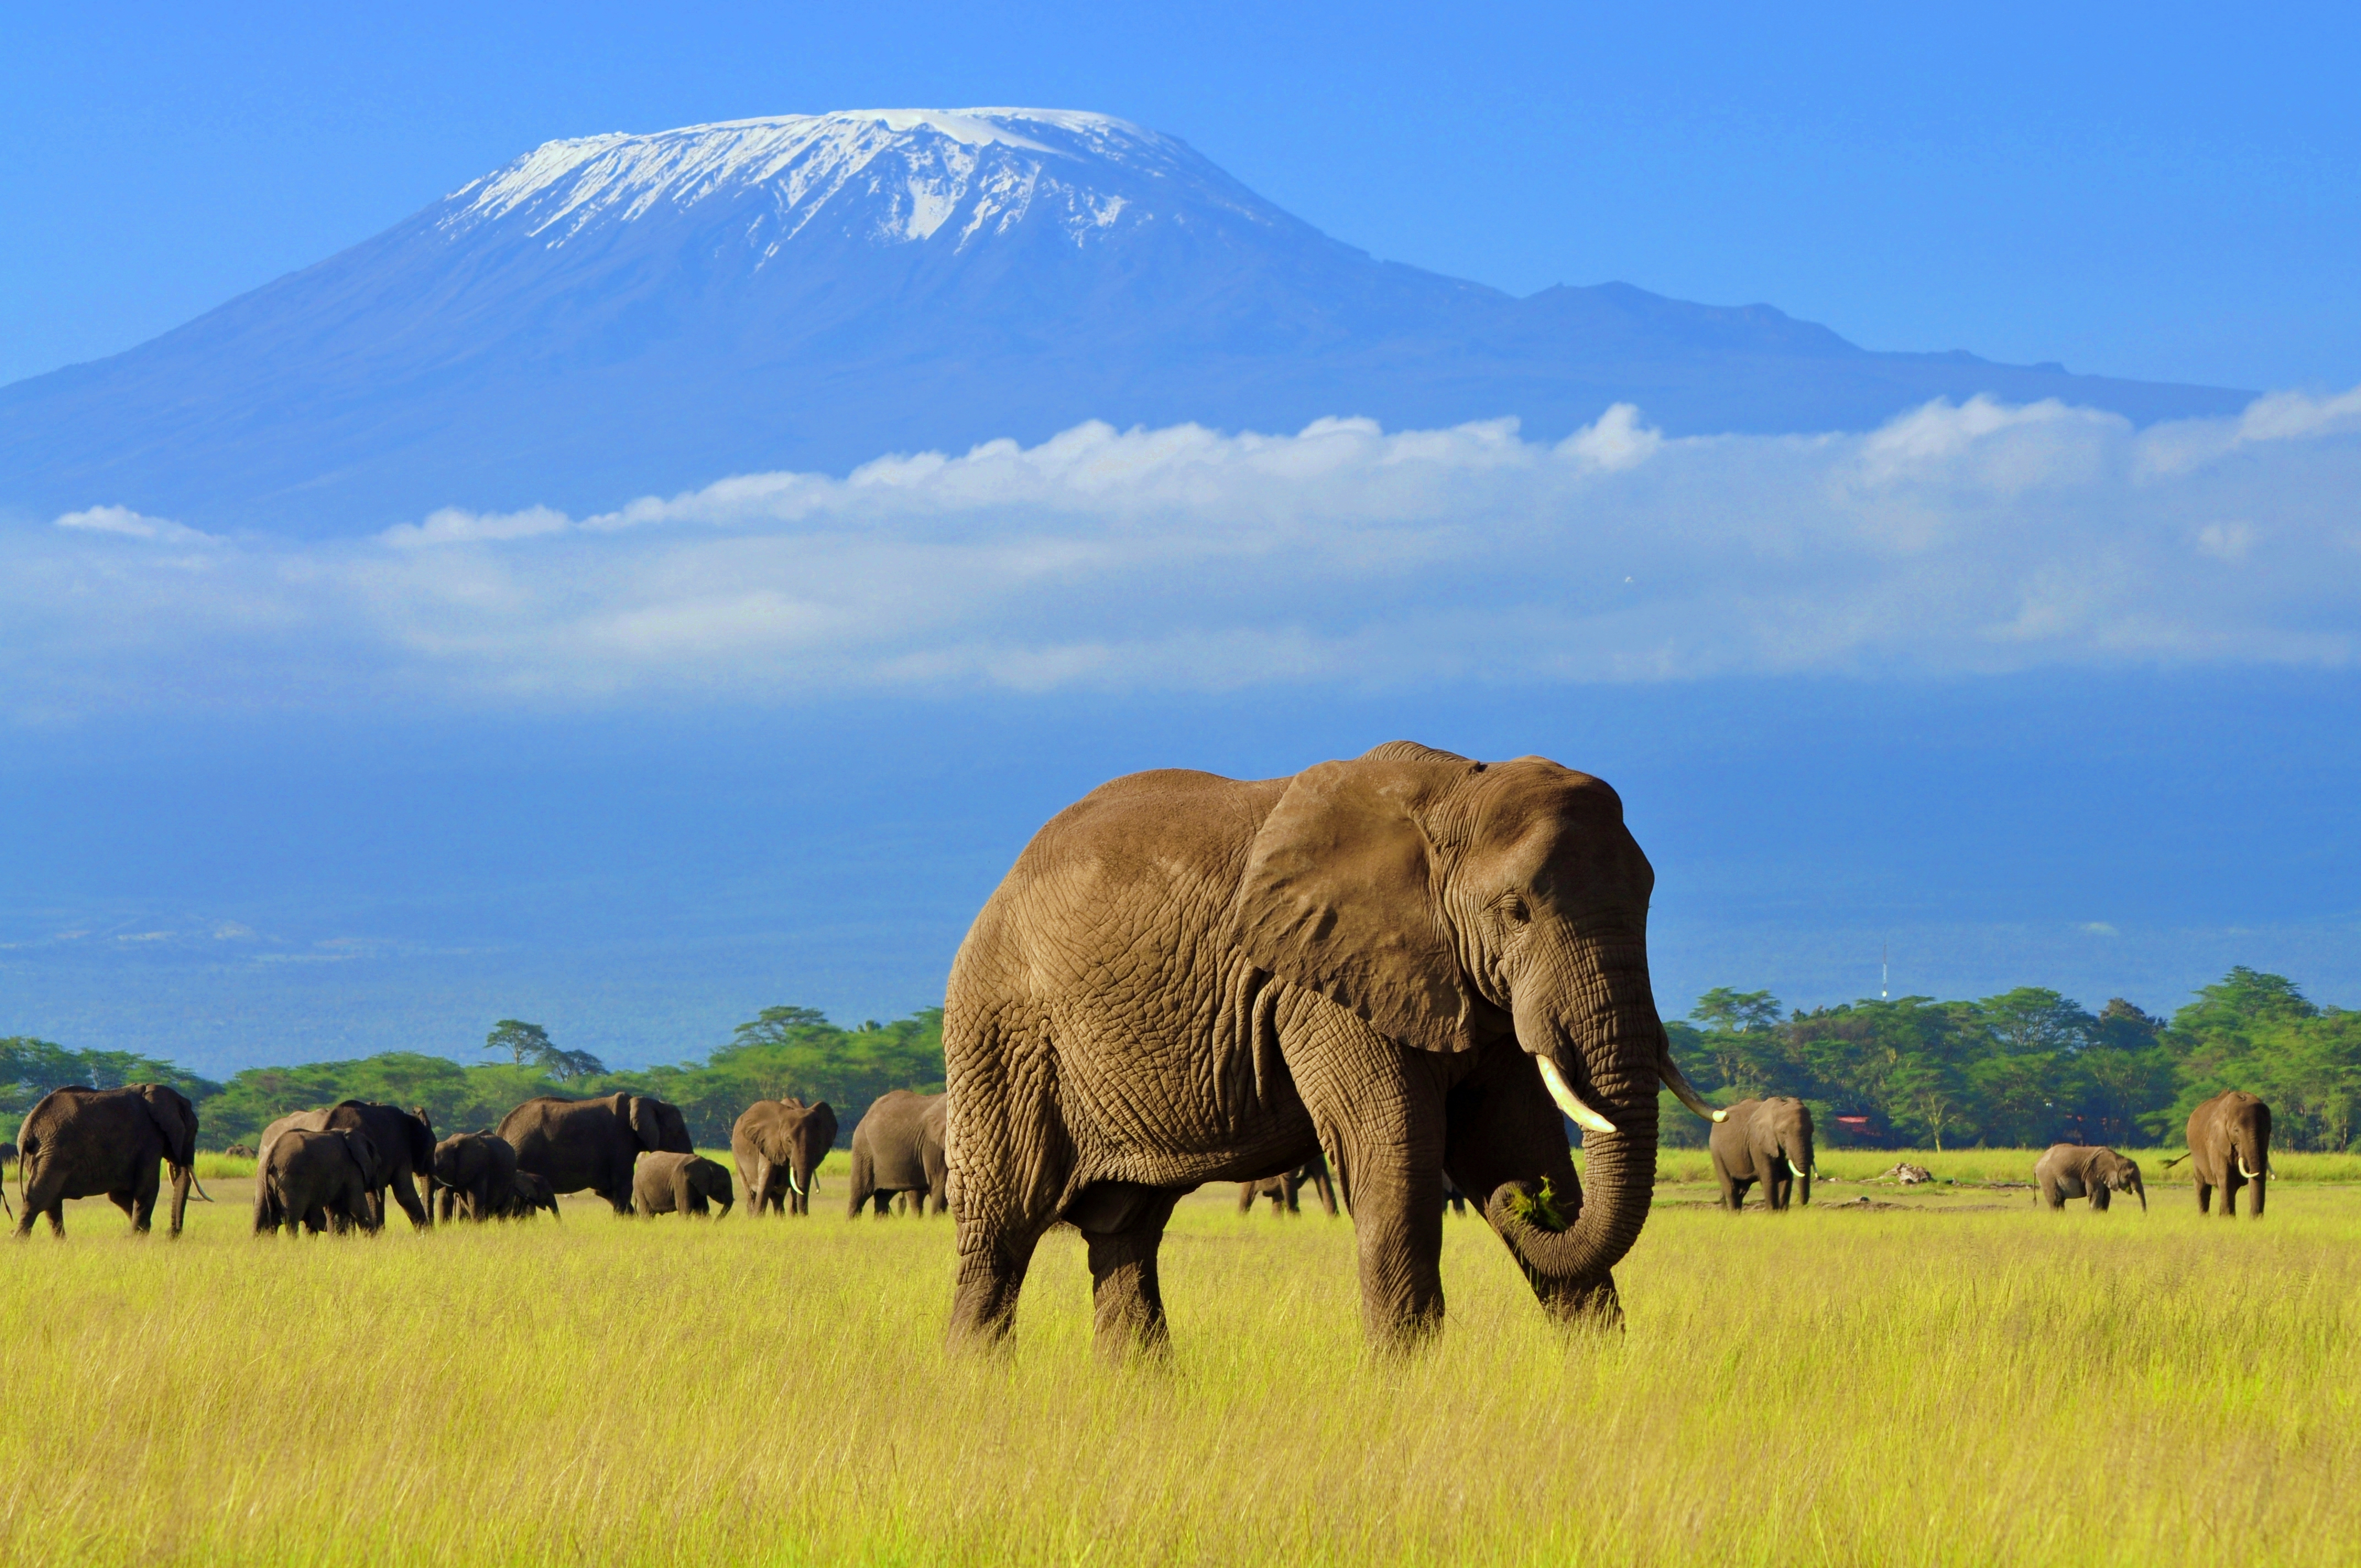 elephant in front of mt Kilimanjaro